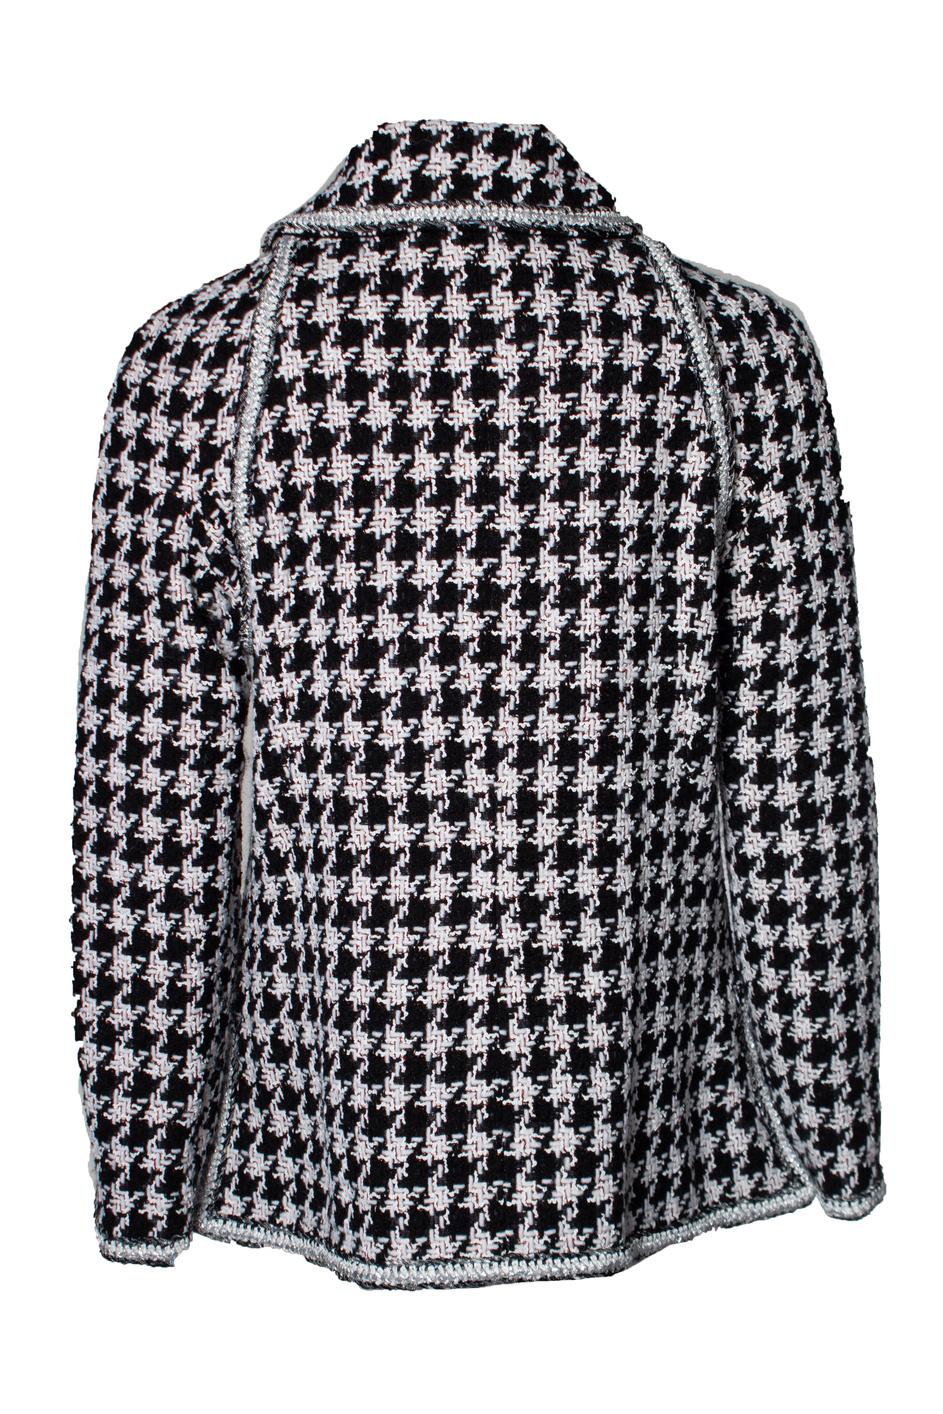 Chanel, Black and white houndstooth jacket In Excellent Condition For Sale In AMSTERDAM, NL